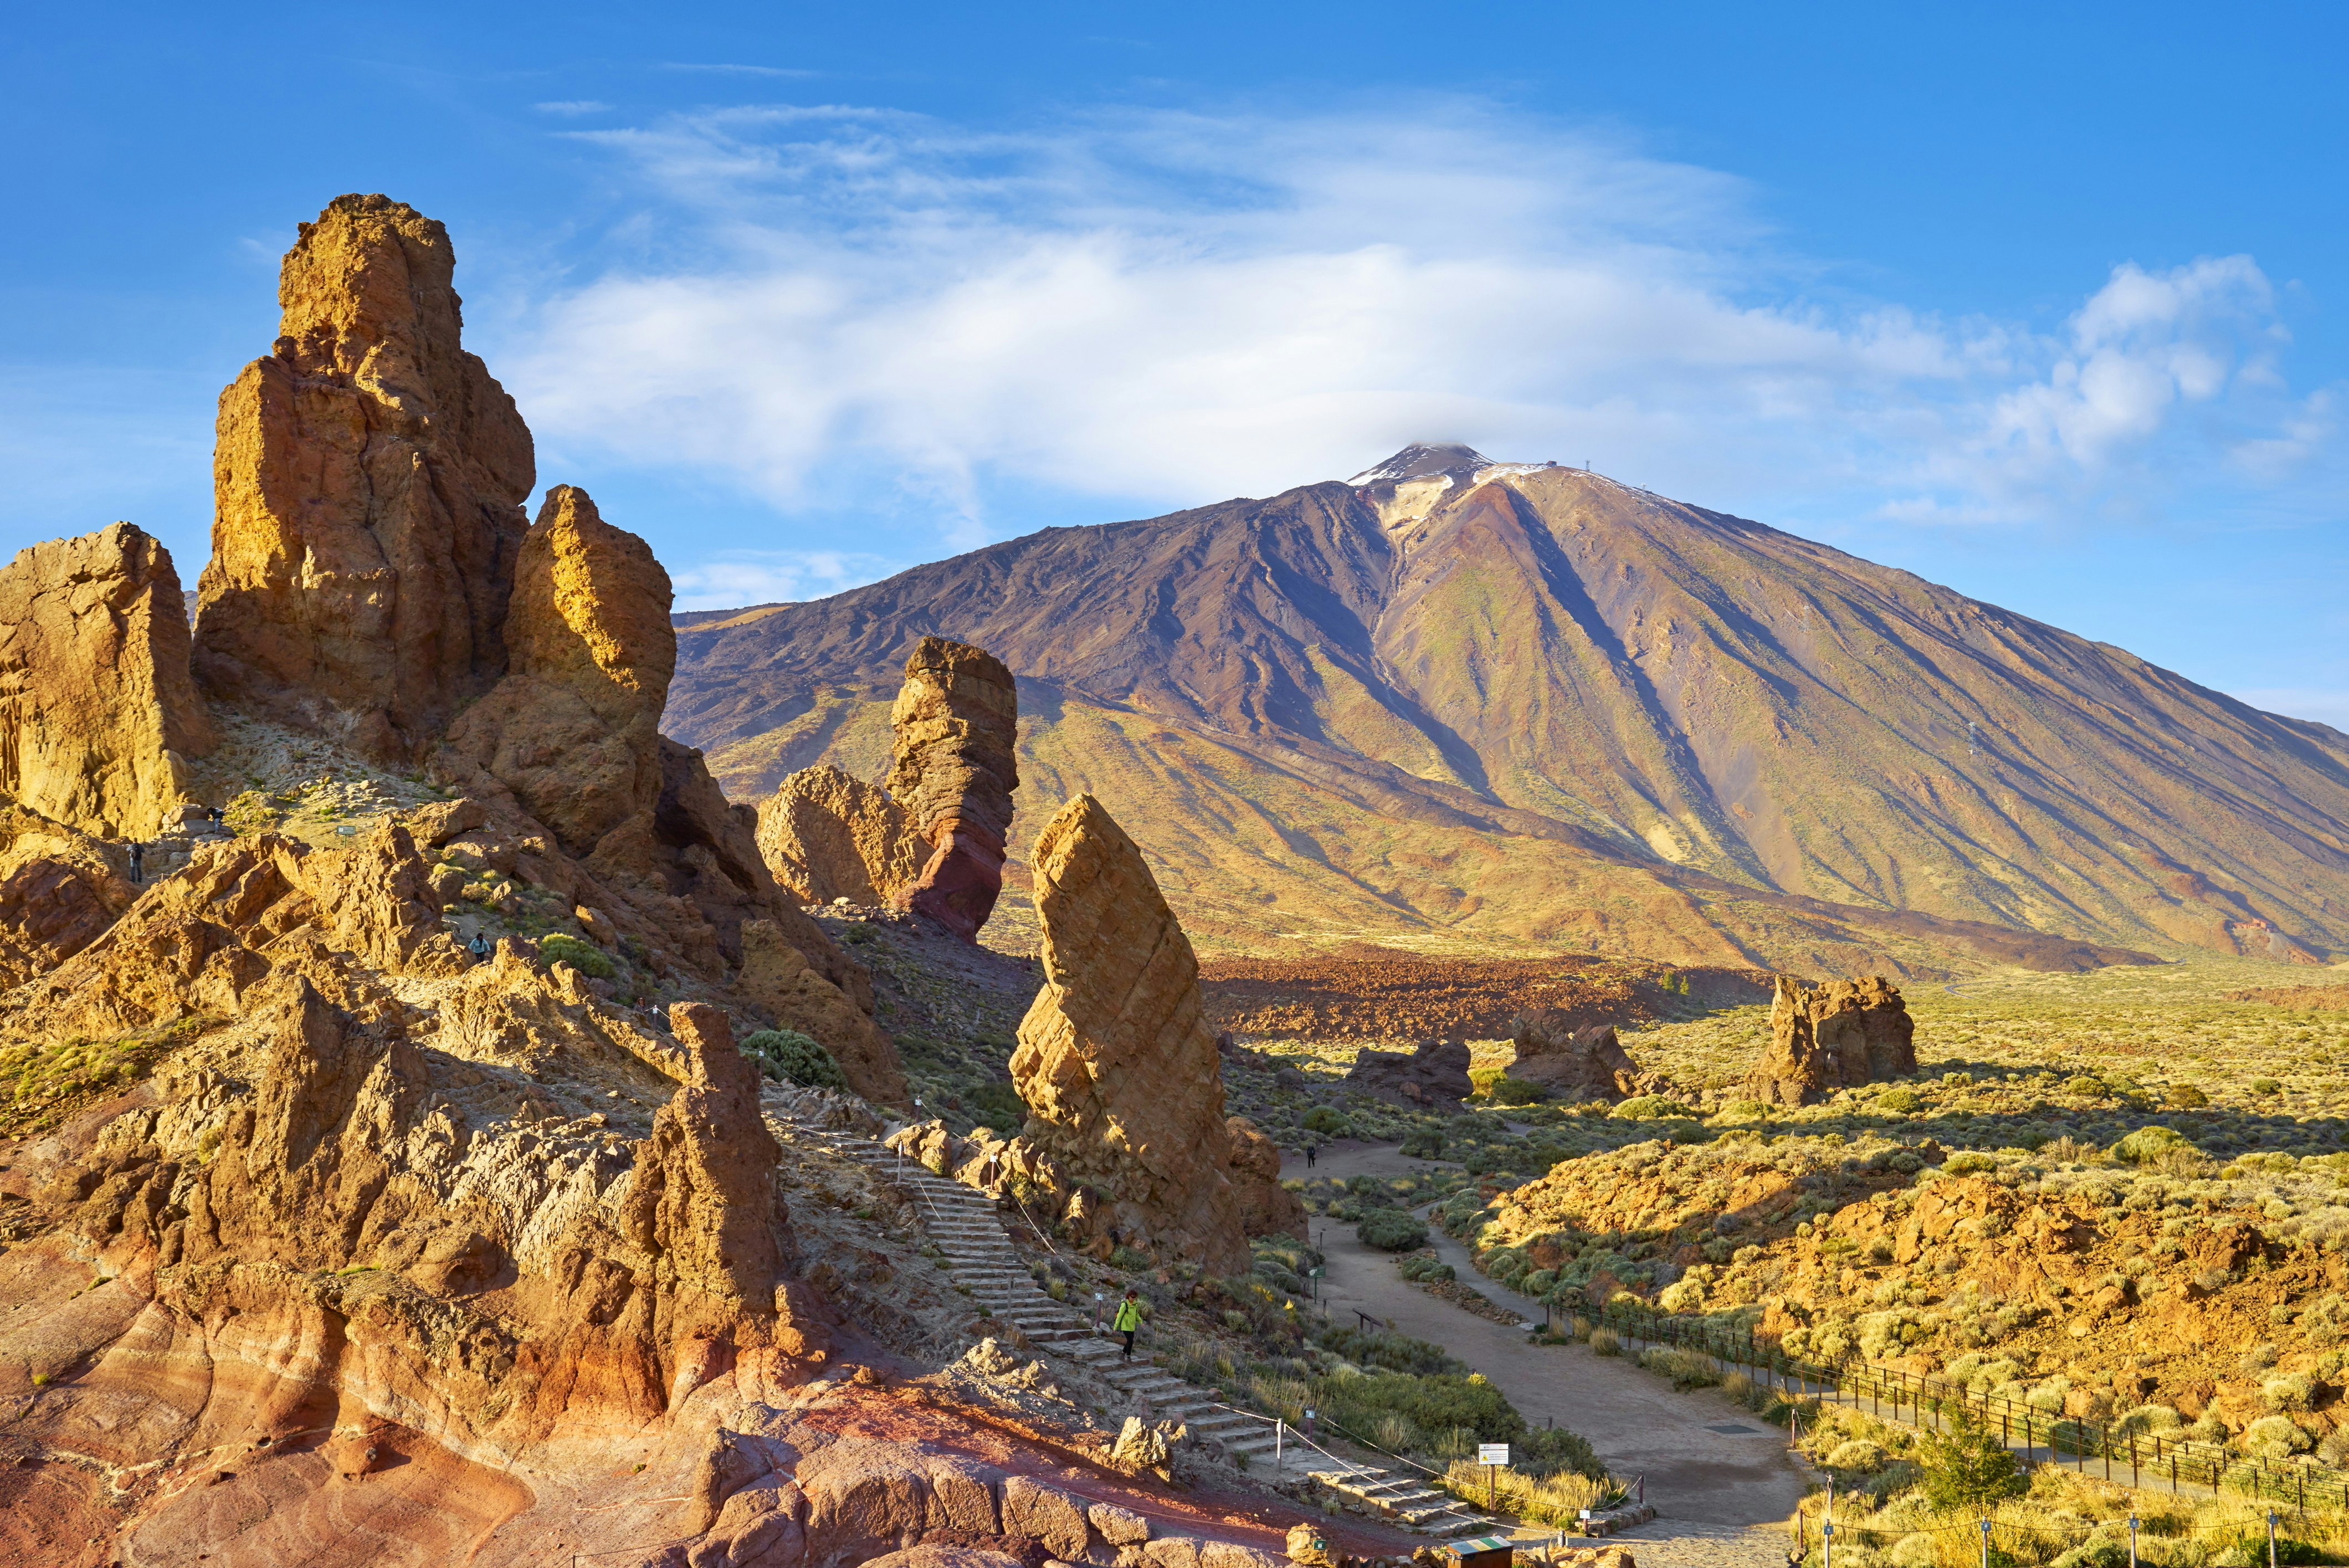 Sand-colored rock formations jut into the sky with the volcanic cone of El Teide in the background at Teide National Park, Tenerife